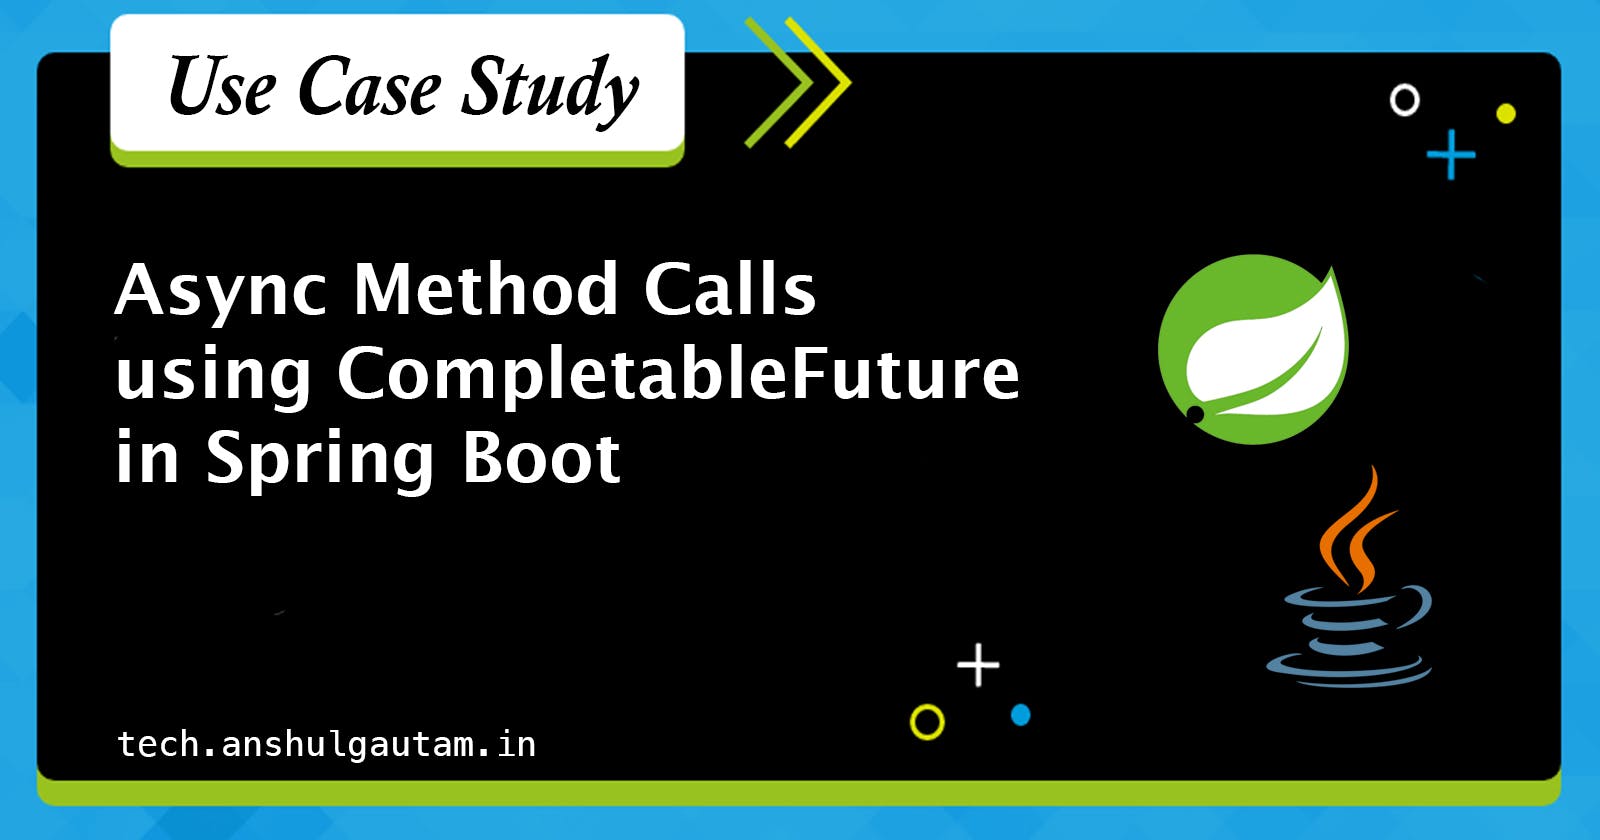 Async Method Calls using CompletableFuture in Spring Boot